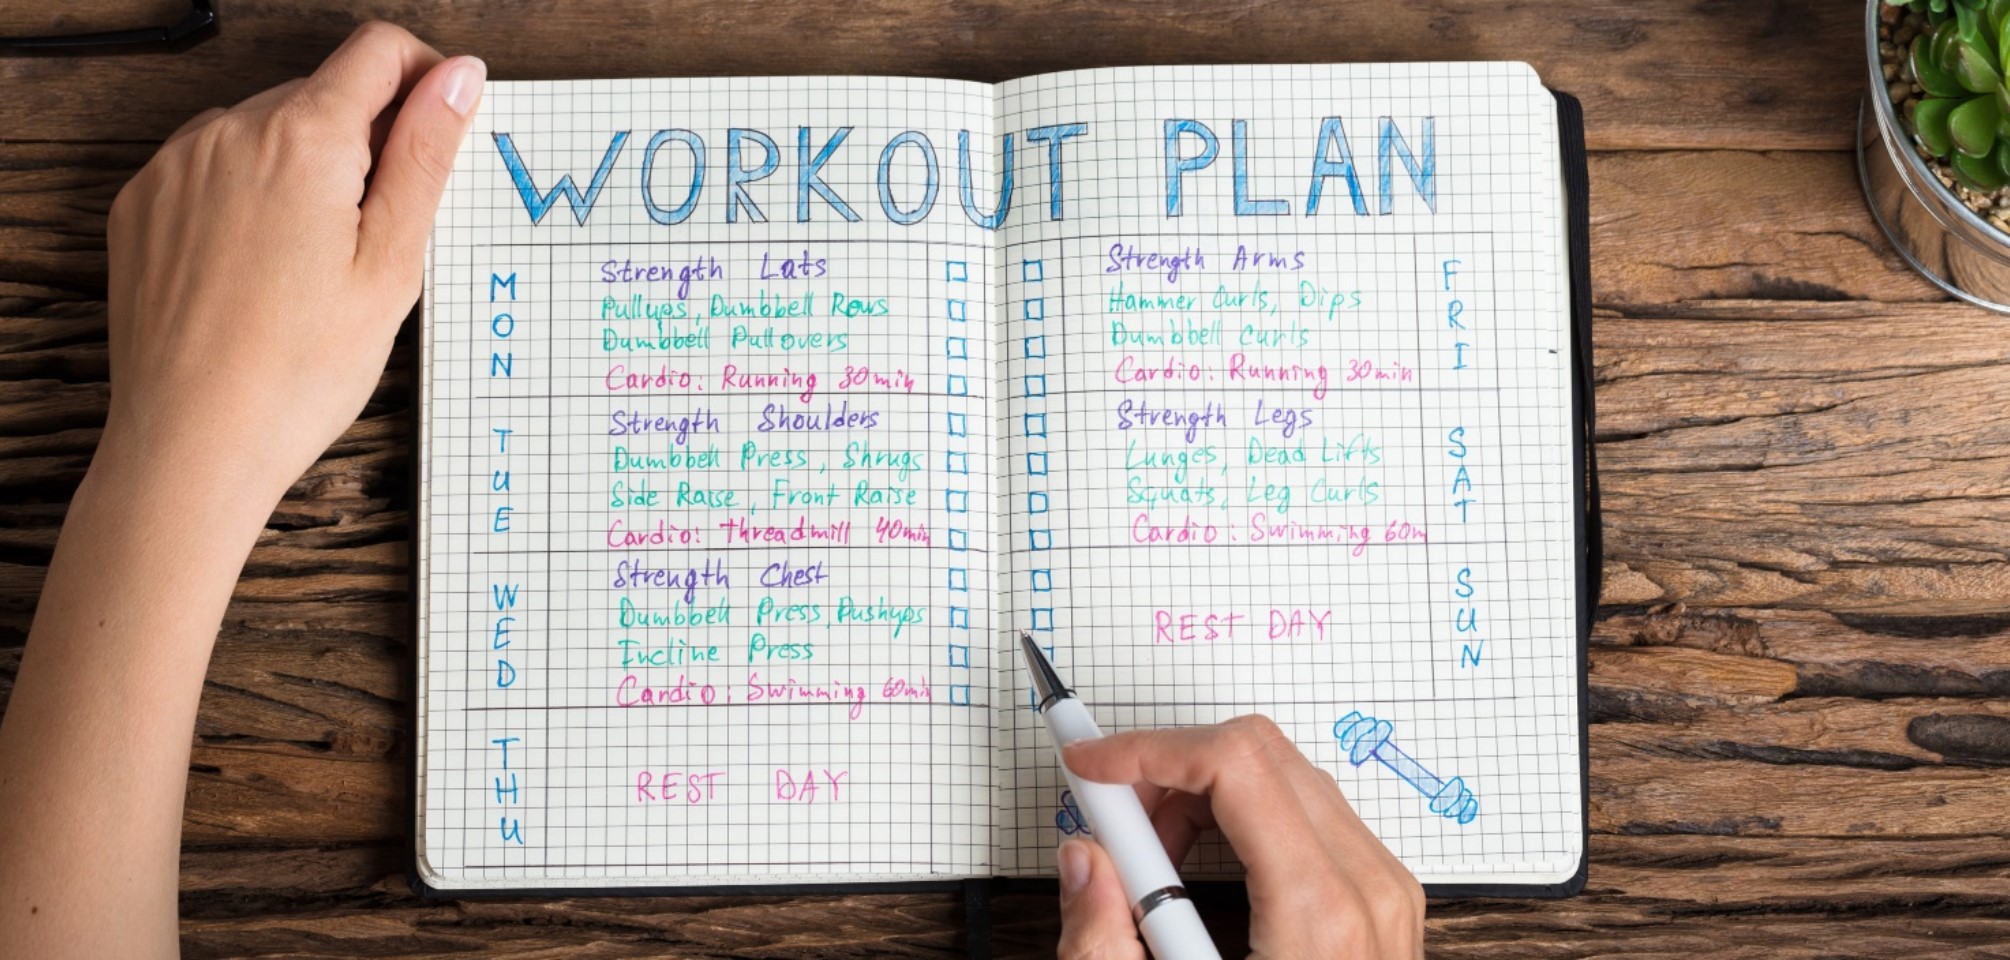 weight loss workout plan for beginners at the gym